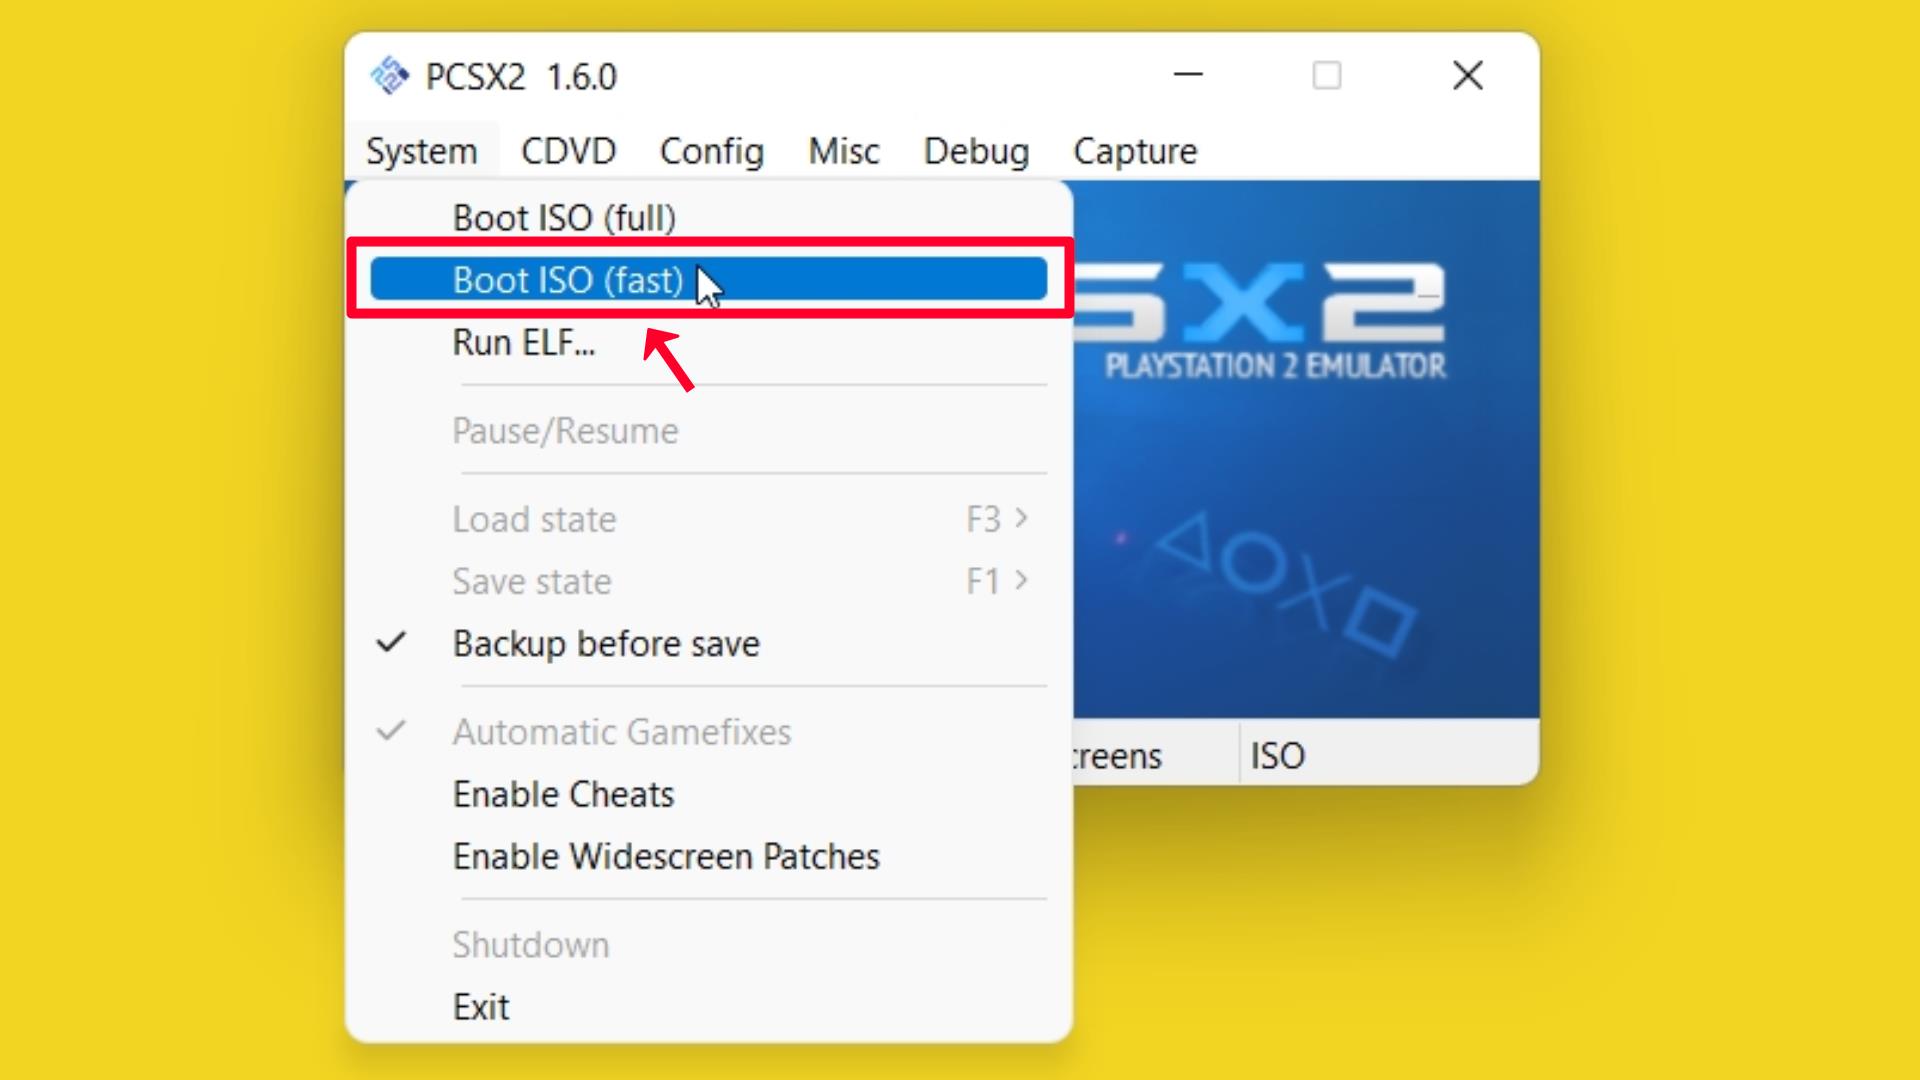 Step 85 Boot ISO fast